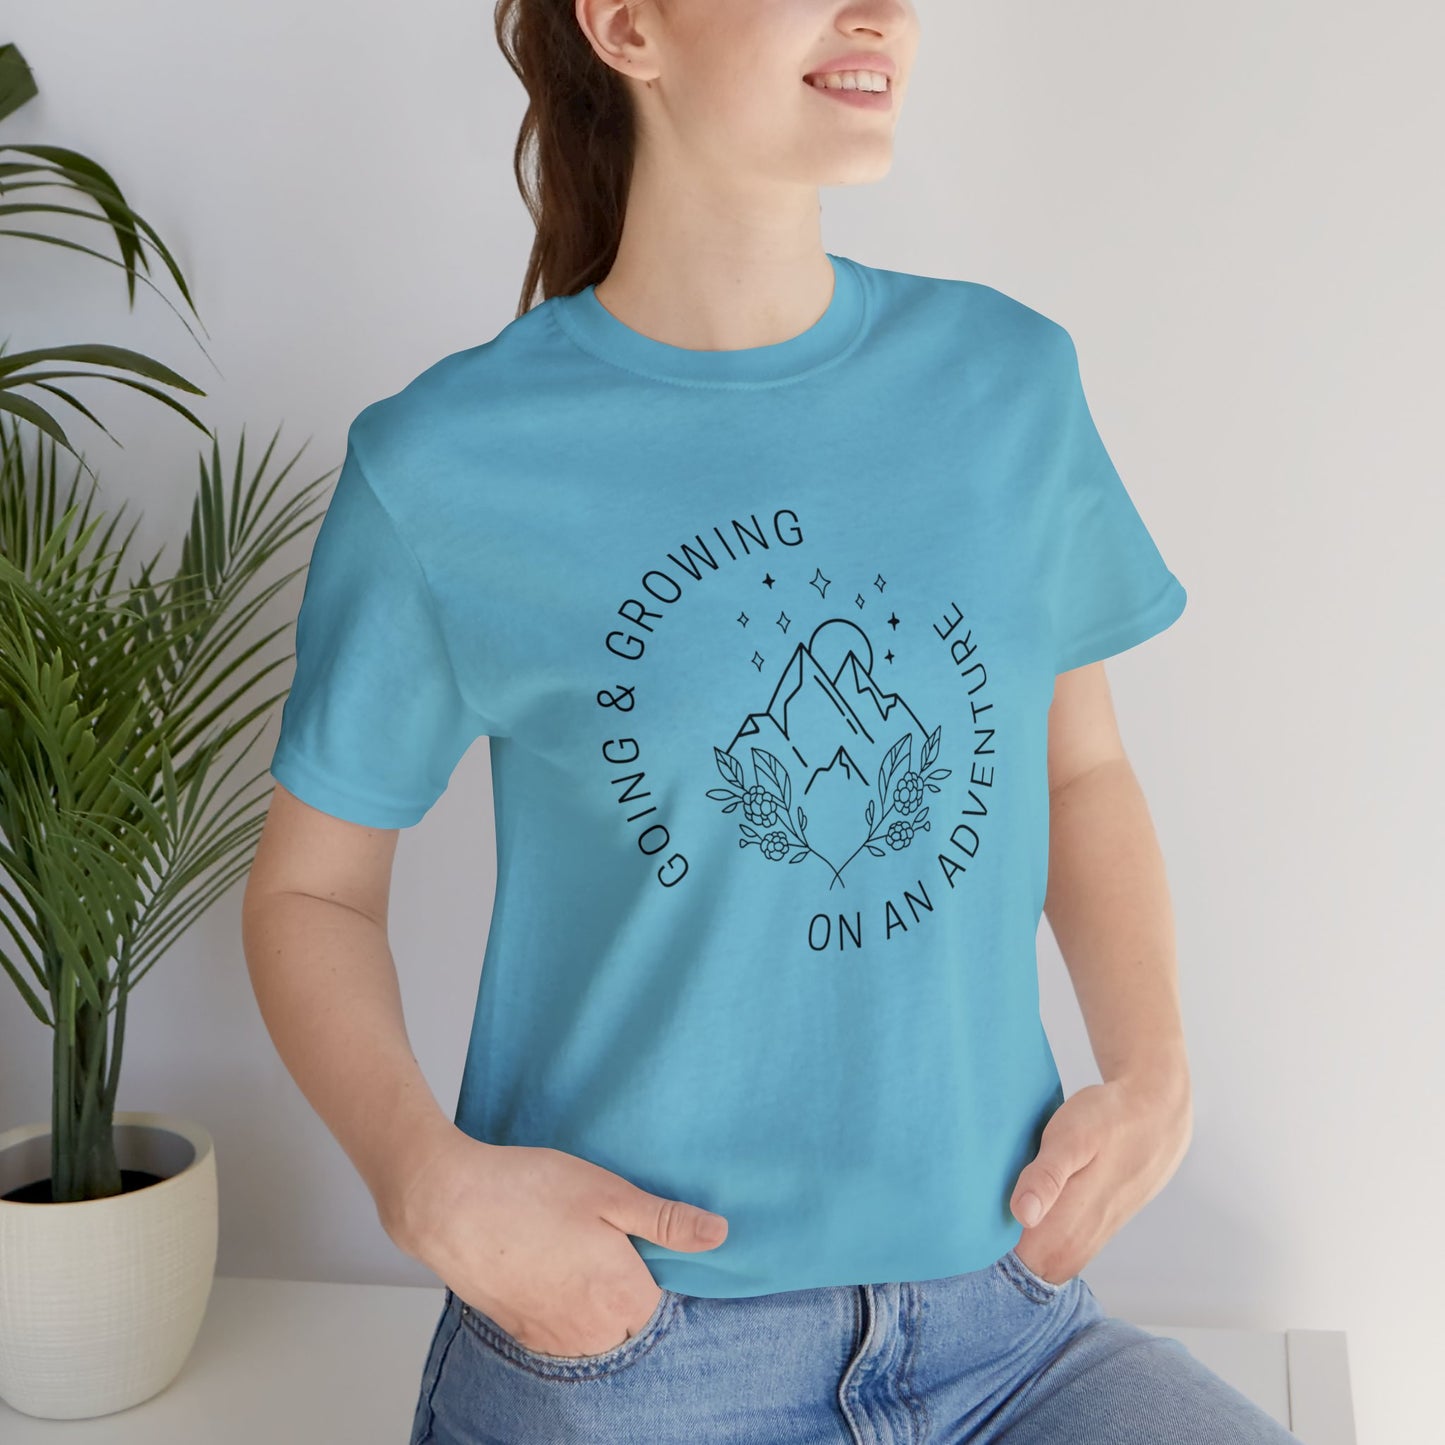 Going and Growing Adventure Tee